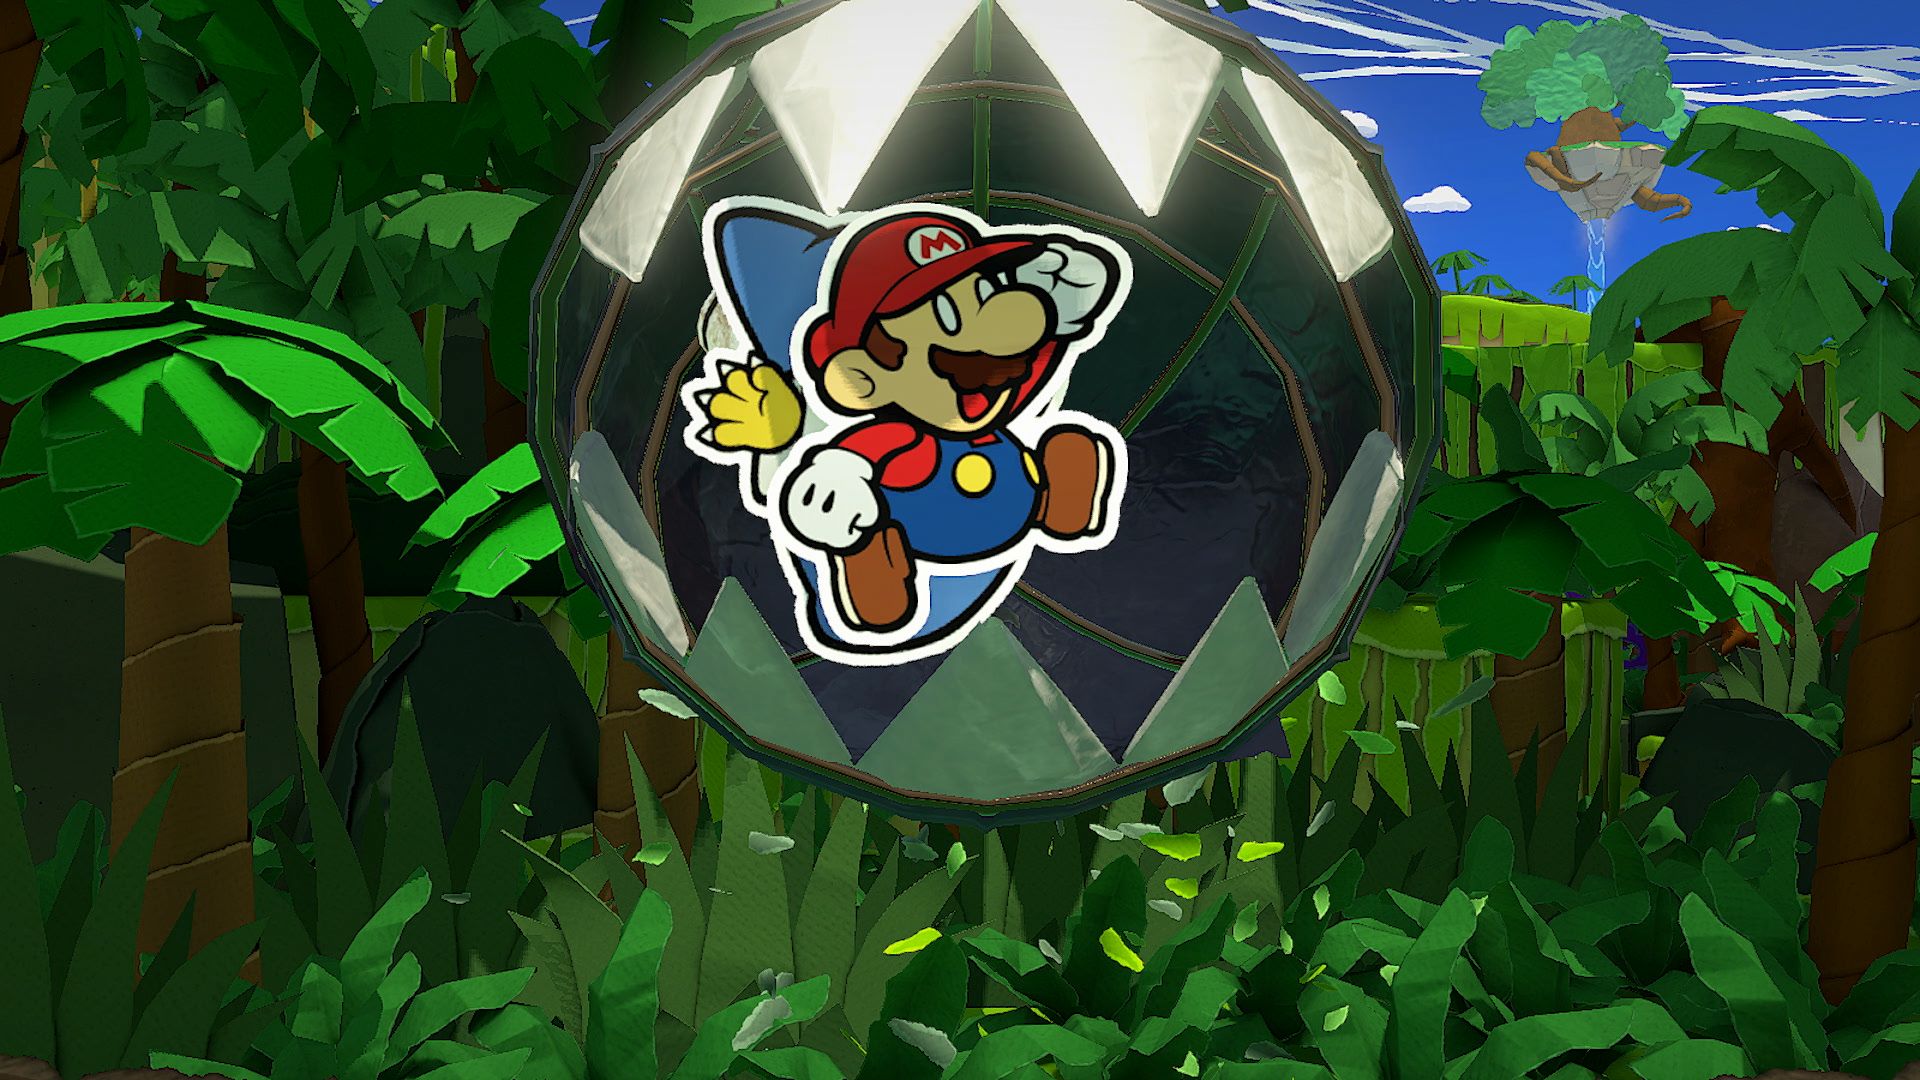 Buy NINTENDO Game Paper Mario The Origami King at Best price